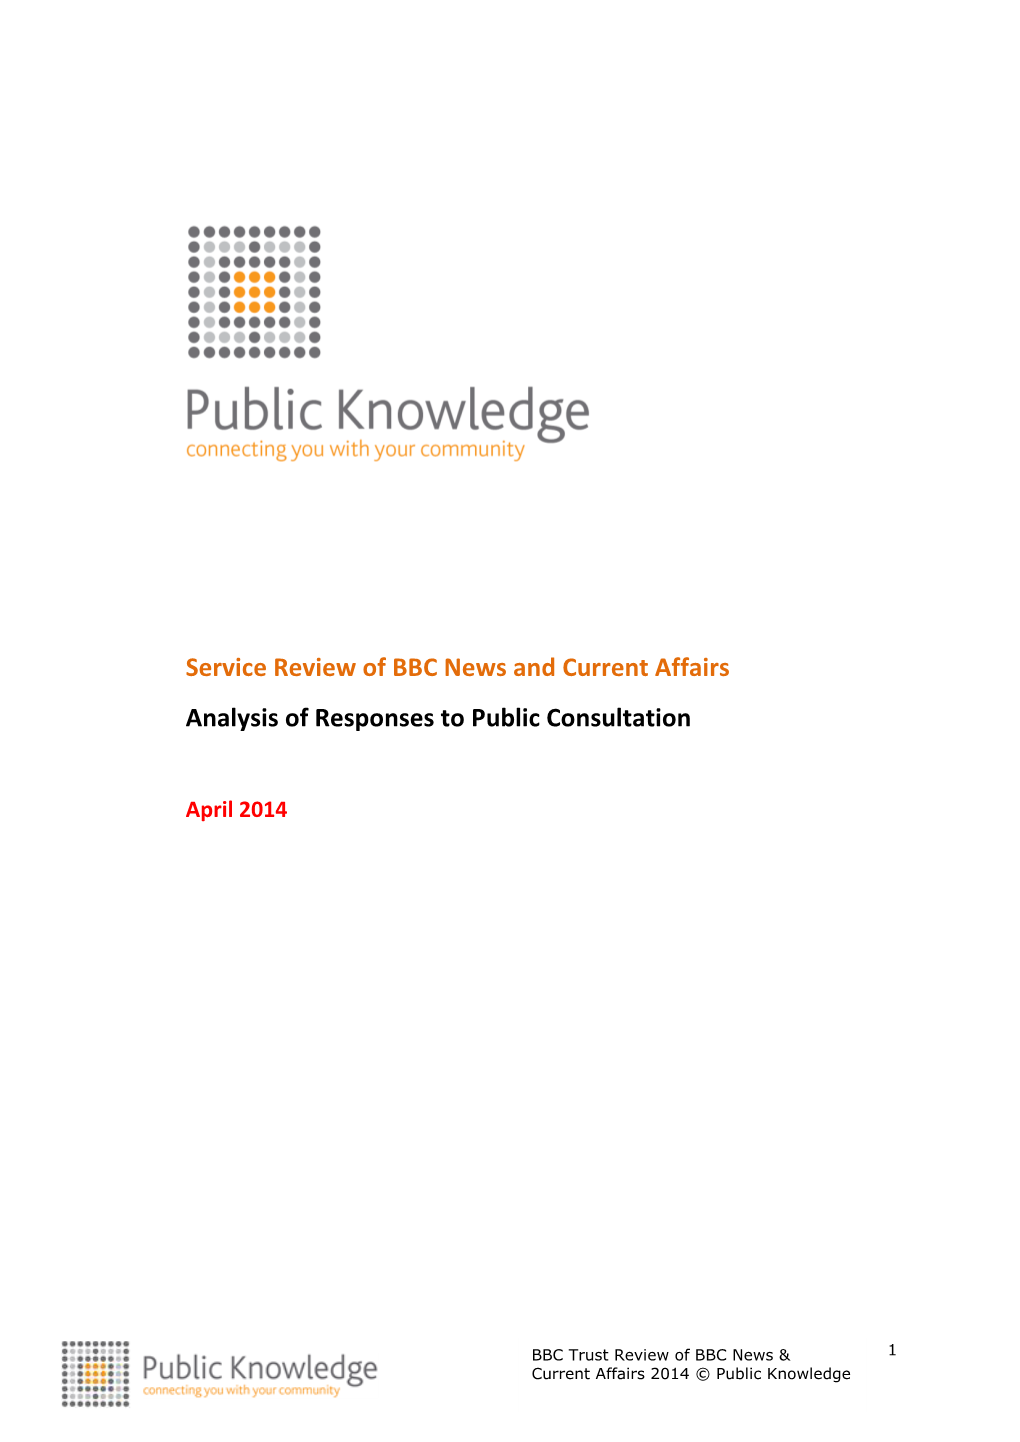 Service Review of BBC News and Current Affairs Analysis of Responses to Public Consultation